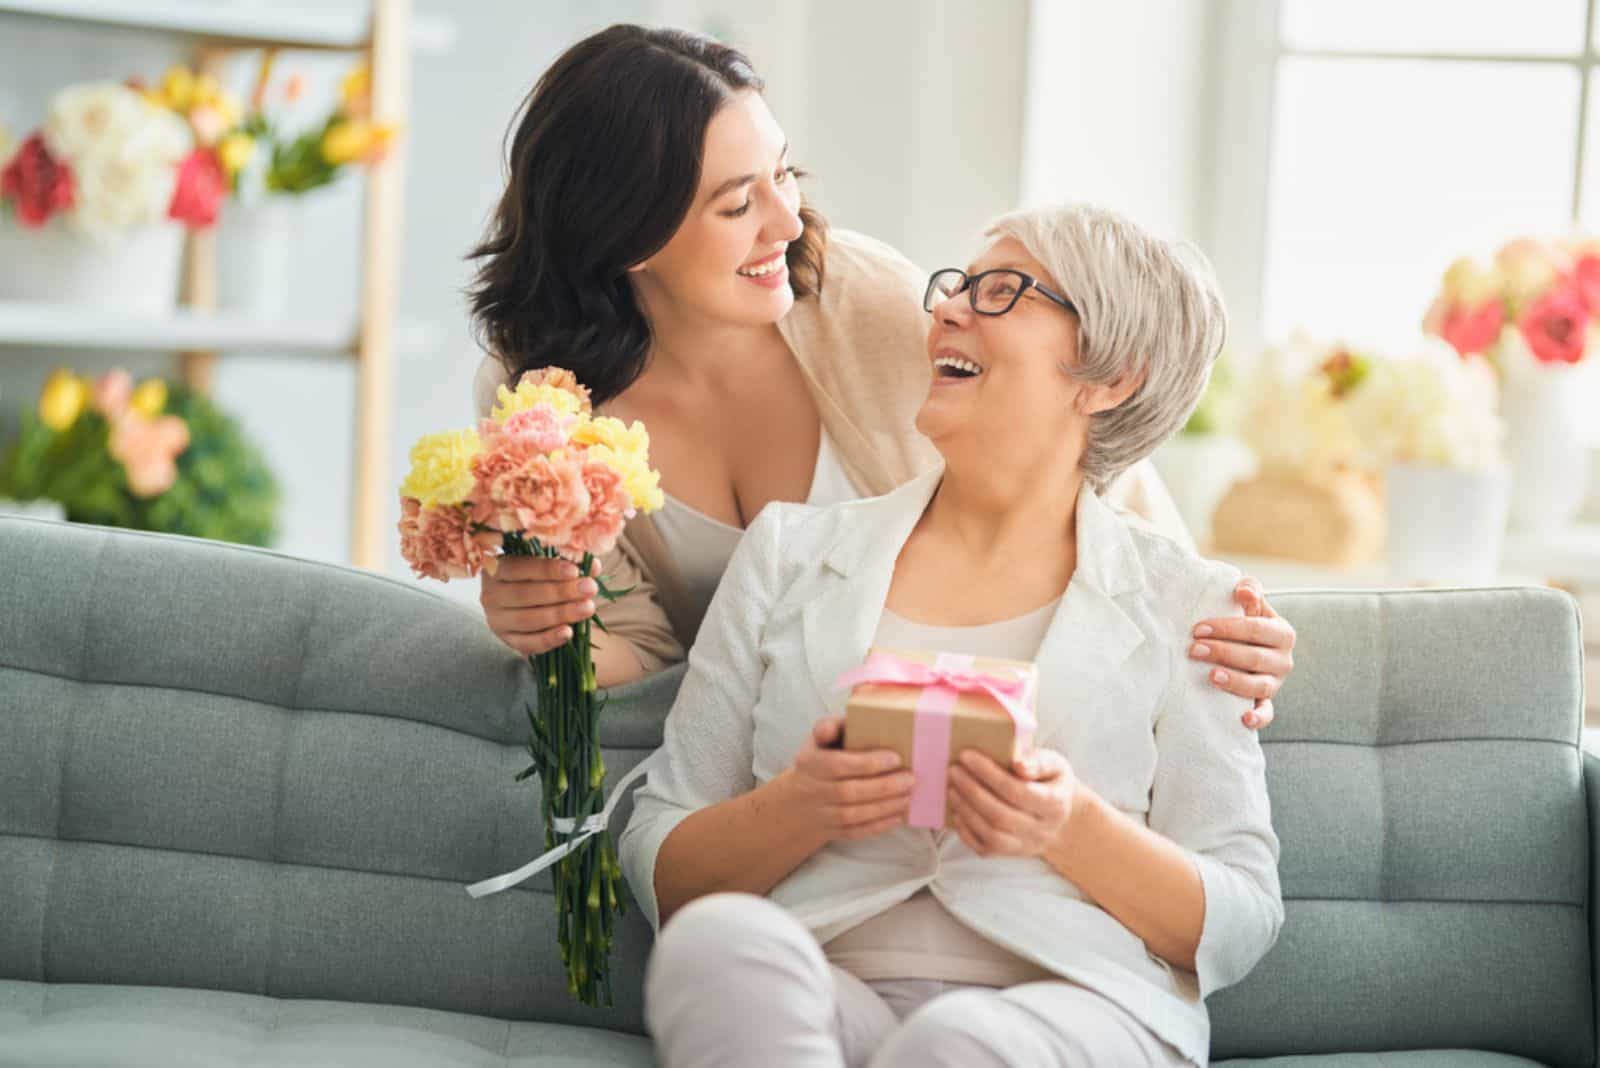 smiling woman with her mother in law for her birthday